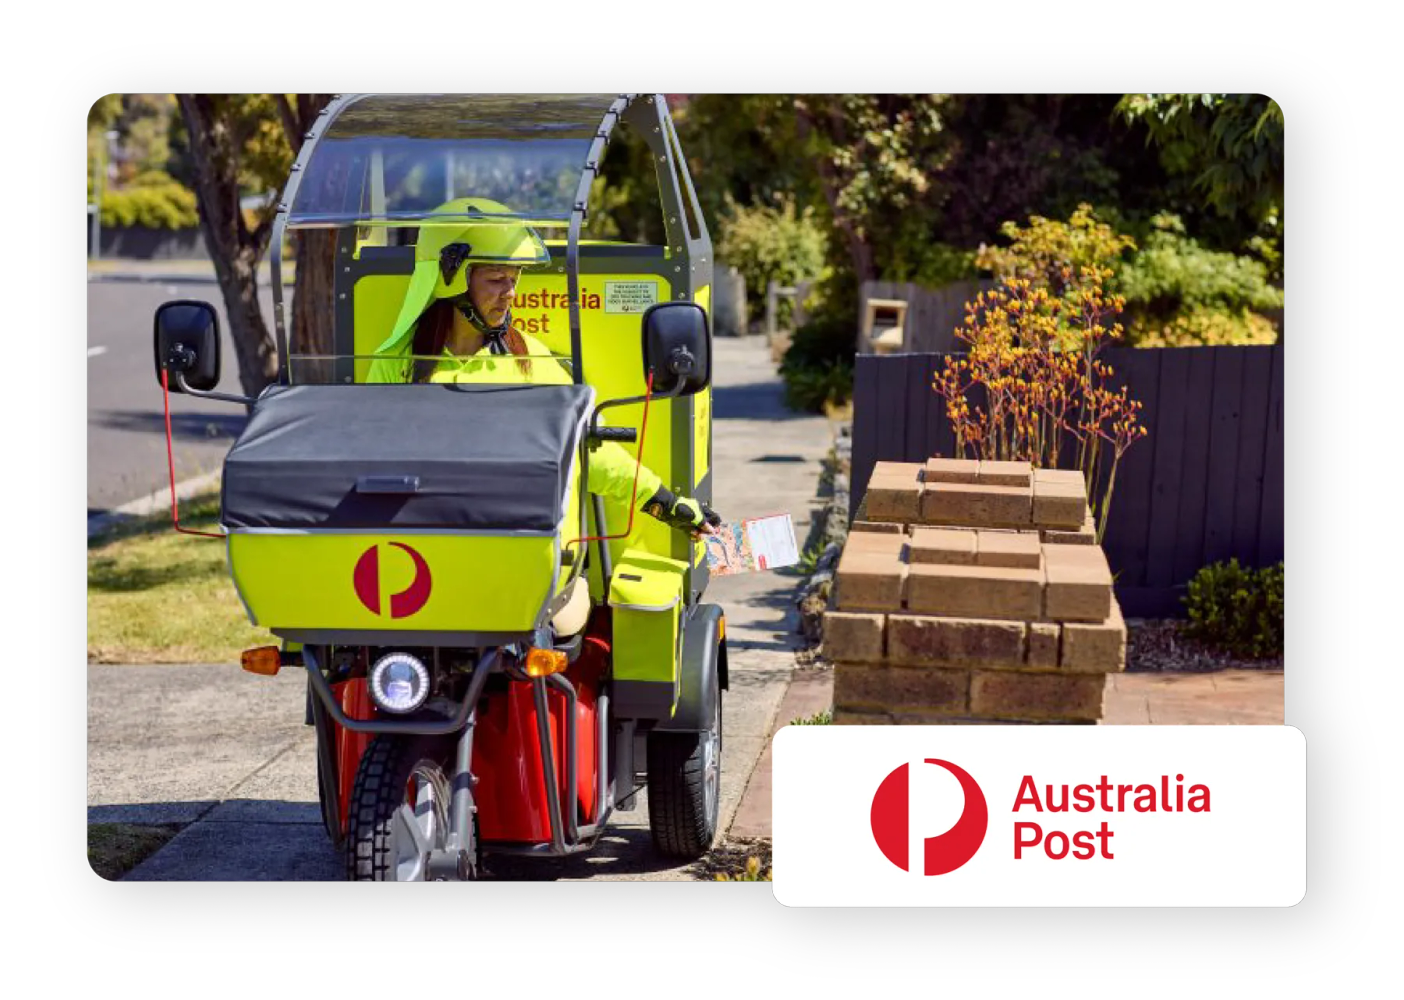 Accurate Australia Post shipping times